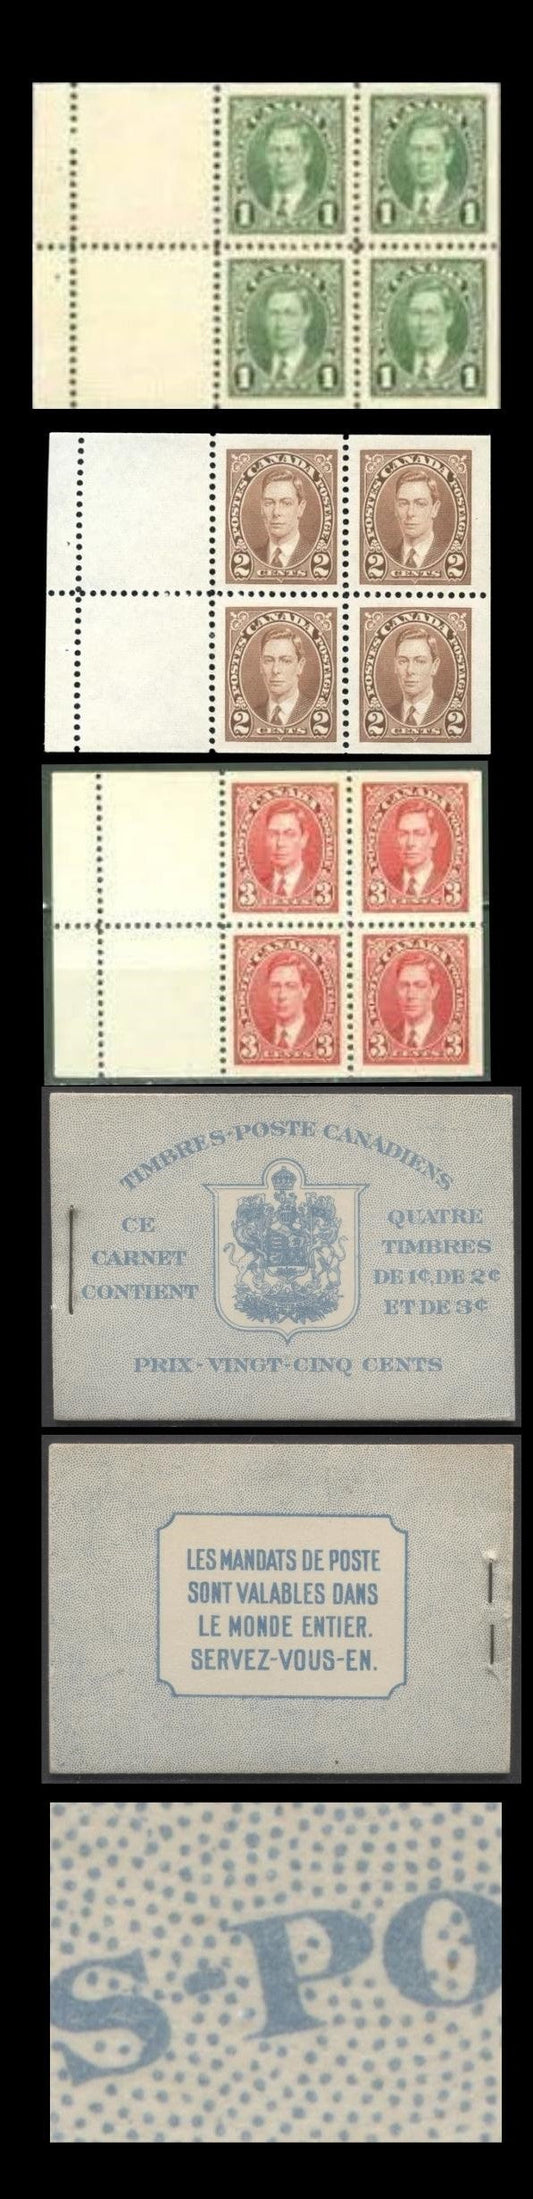 Lot 84 Canada #BK31dF 1937-1942 Mufti Issue, A Complete 25c French Booklet, No Rate Page,  Panes Of 4 Of 1c Green, 2c Brown & 3c Dark Carmine, Horizontal Ribbed Paper, Yellowish Gum, Front Cover IIp, Back Cover B, VF, Turquoise Covers